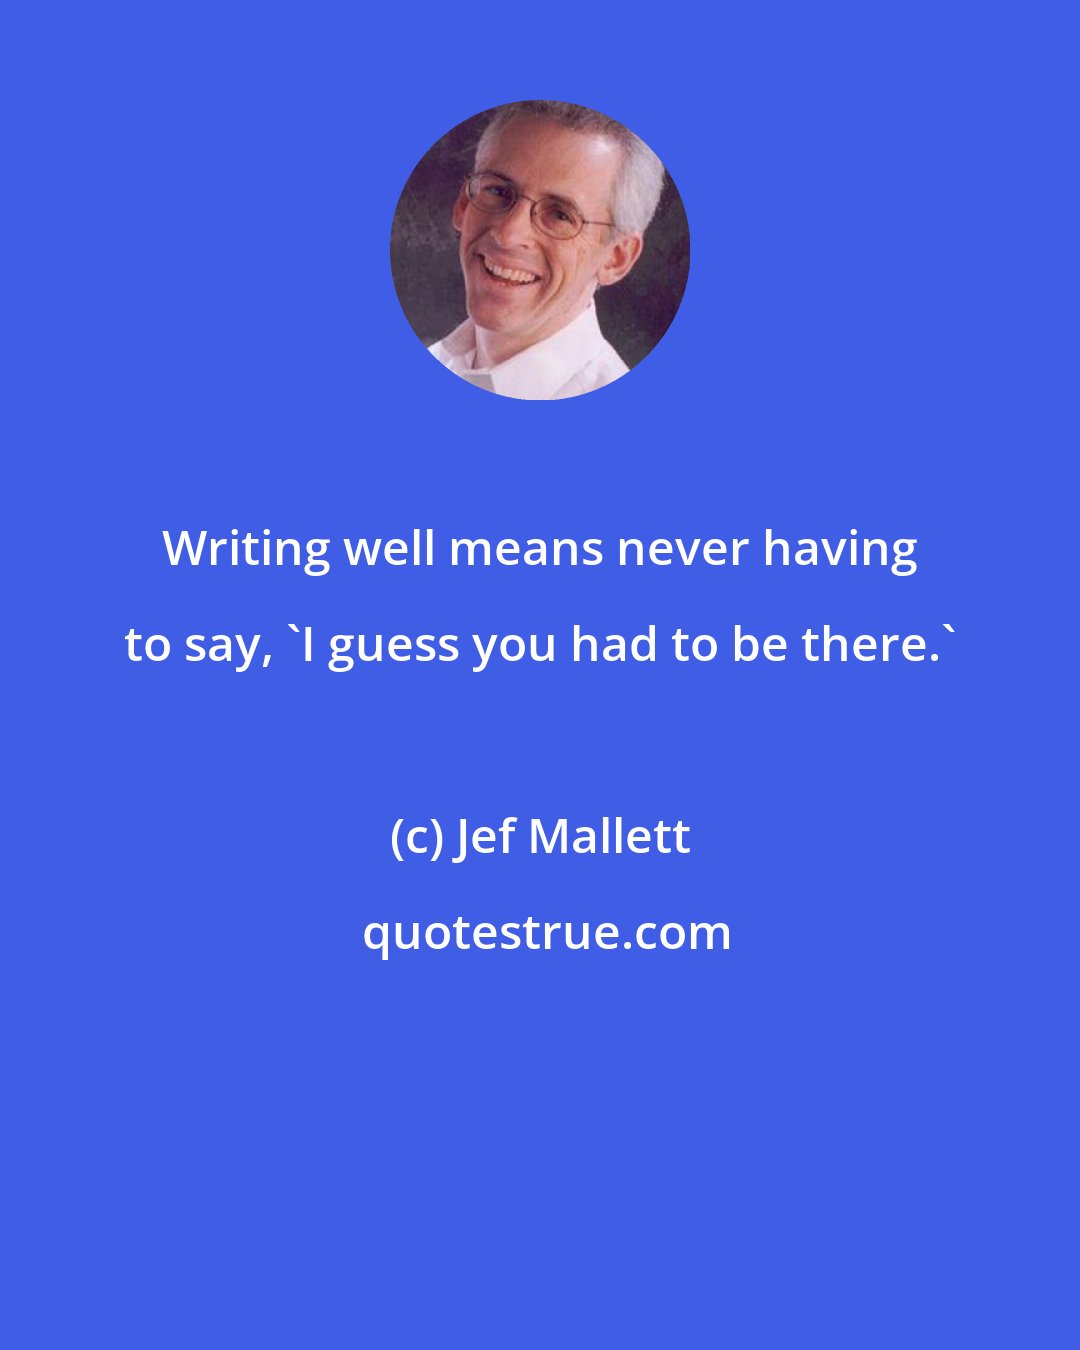 Jef Mallett: Writing well means never having to say, 'I guess you had to be there.'